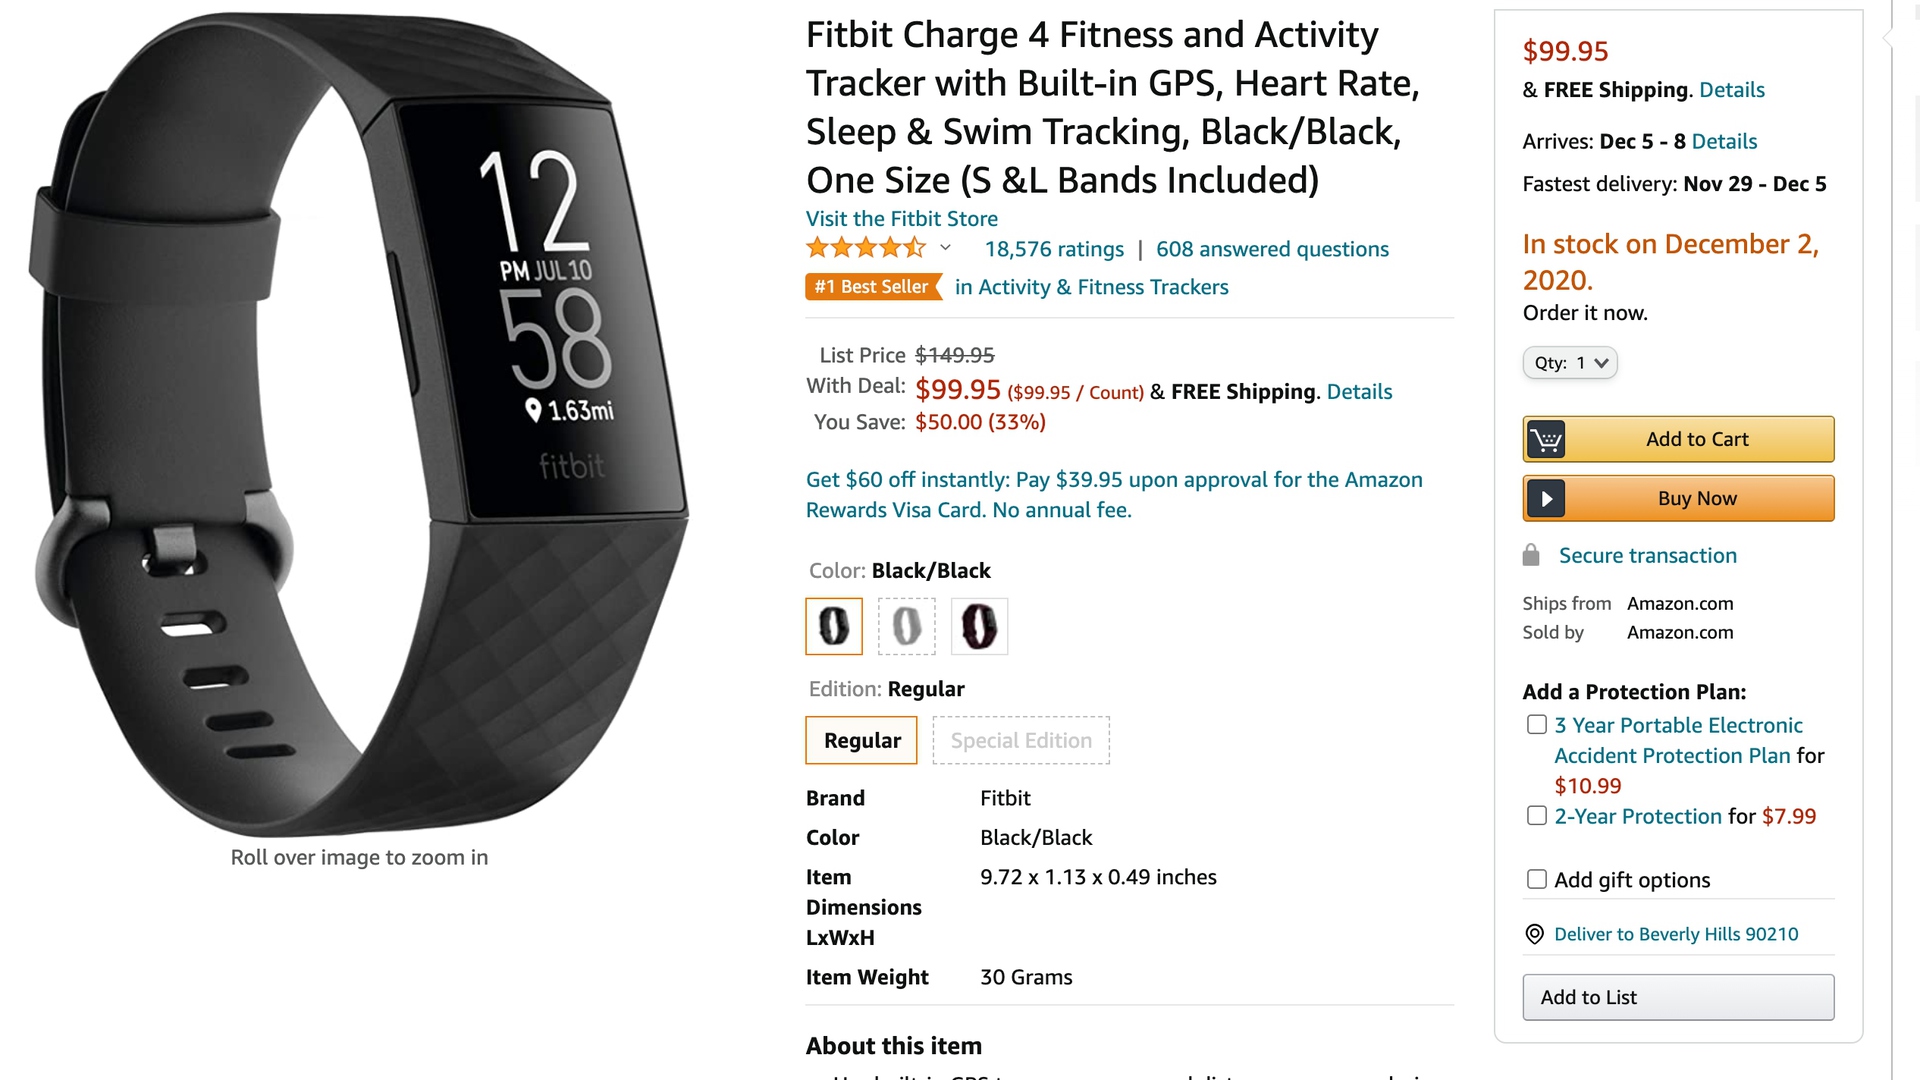 Fitbit Charge 4 Amazon Black Friday Deal